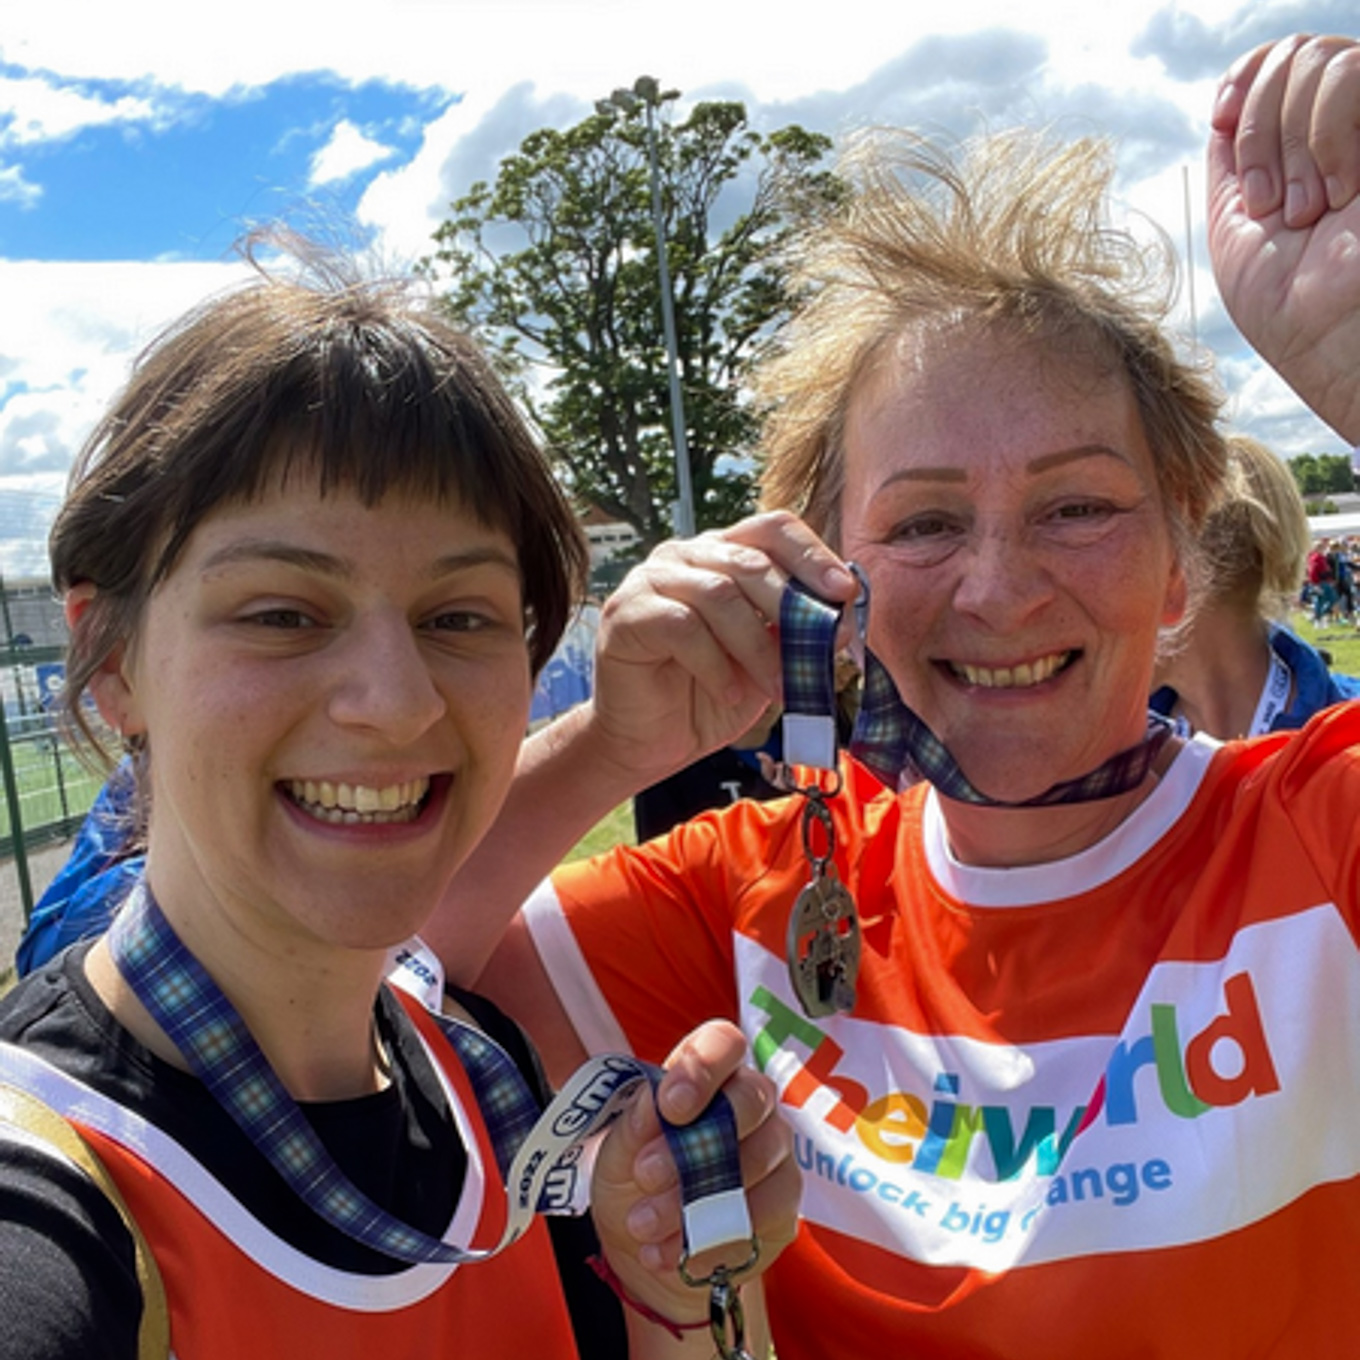 Two runners wearing their medals and Theirworld shirts after running.